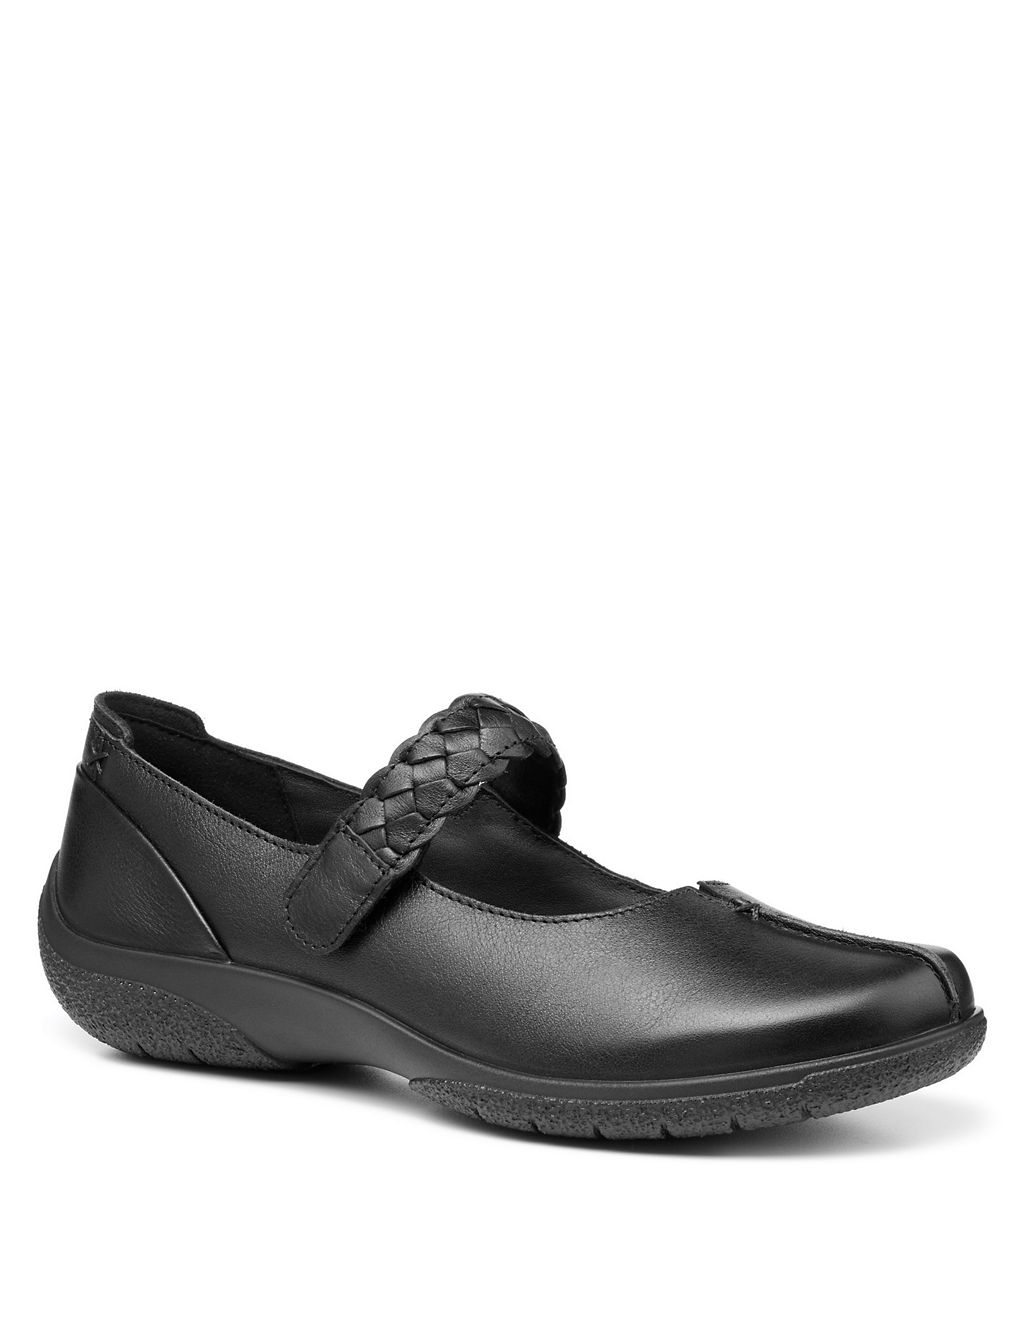 Shake II Wide Fit Leather Riptape Pumps | Hotter | M&S